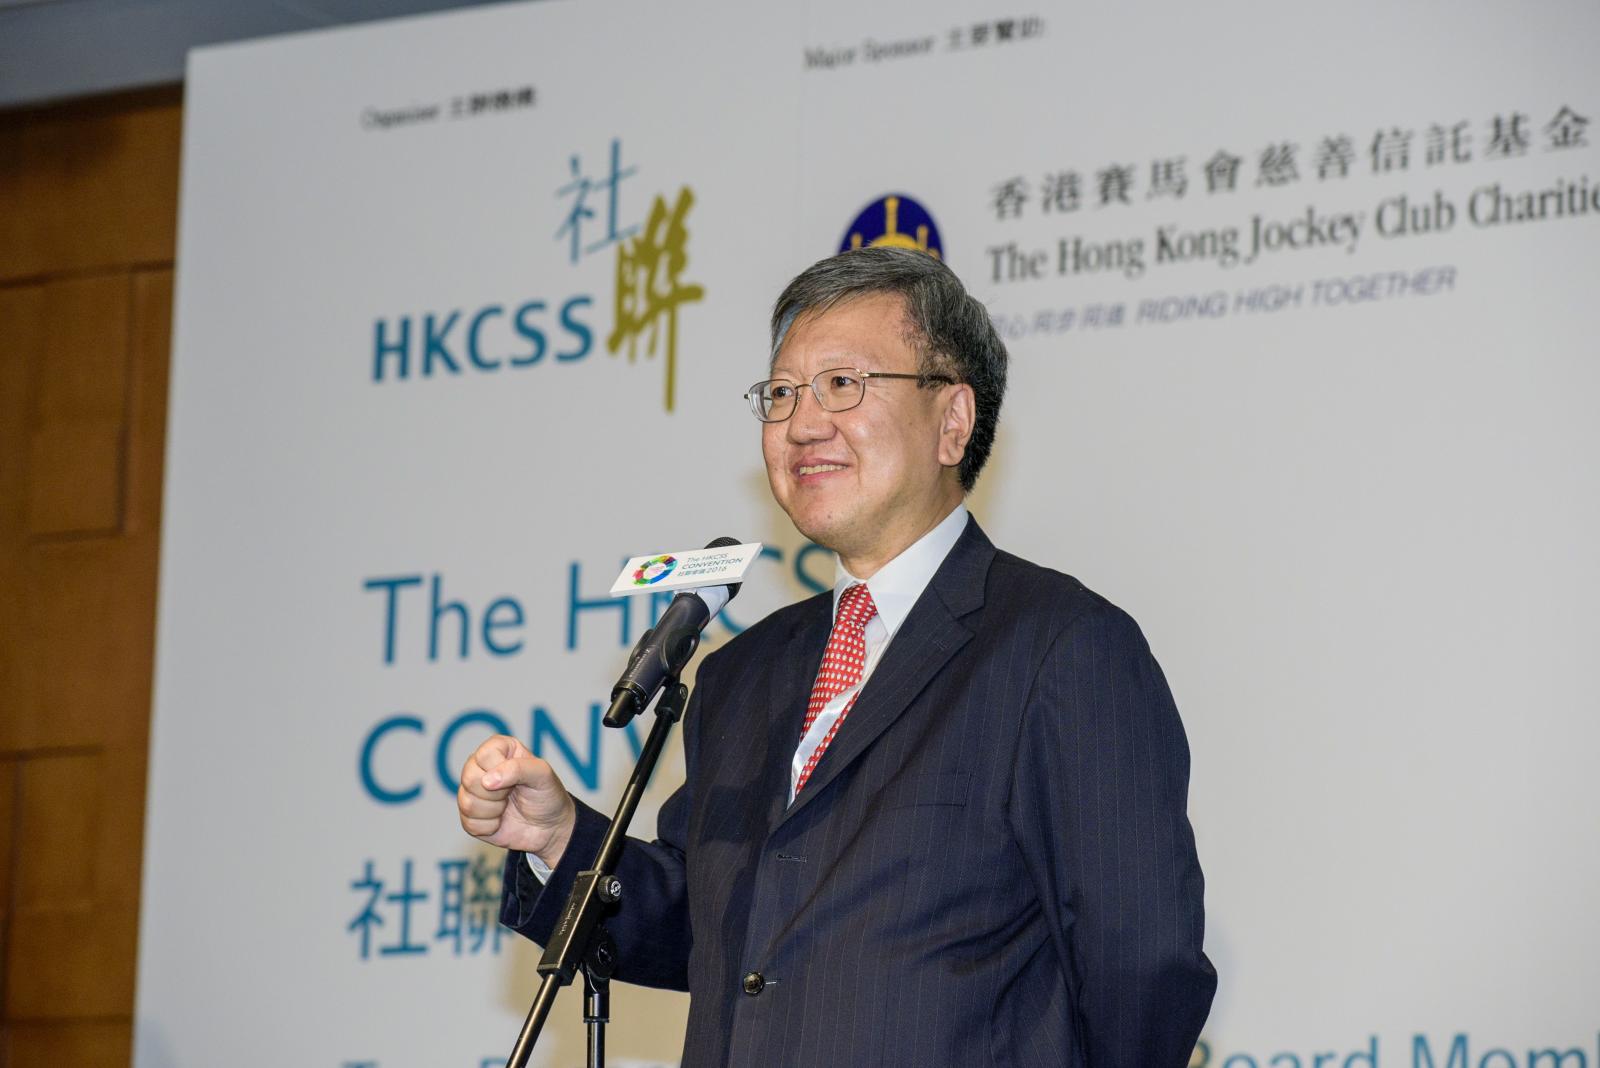 Mr Kennedy LIU, Vice-President of The Hong Kong Council of Social Service, and President of Steering Committee on NGOs Governance Platform Project, expects that the new Project can connect board members of different organizations, collecting wisdoms of individuals to stimulate discussions on ways to enhance governance of the social service sector.